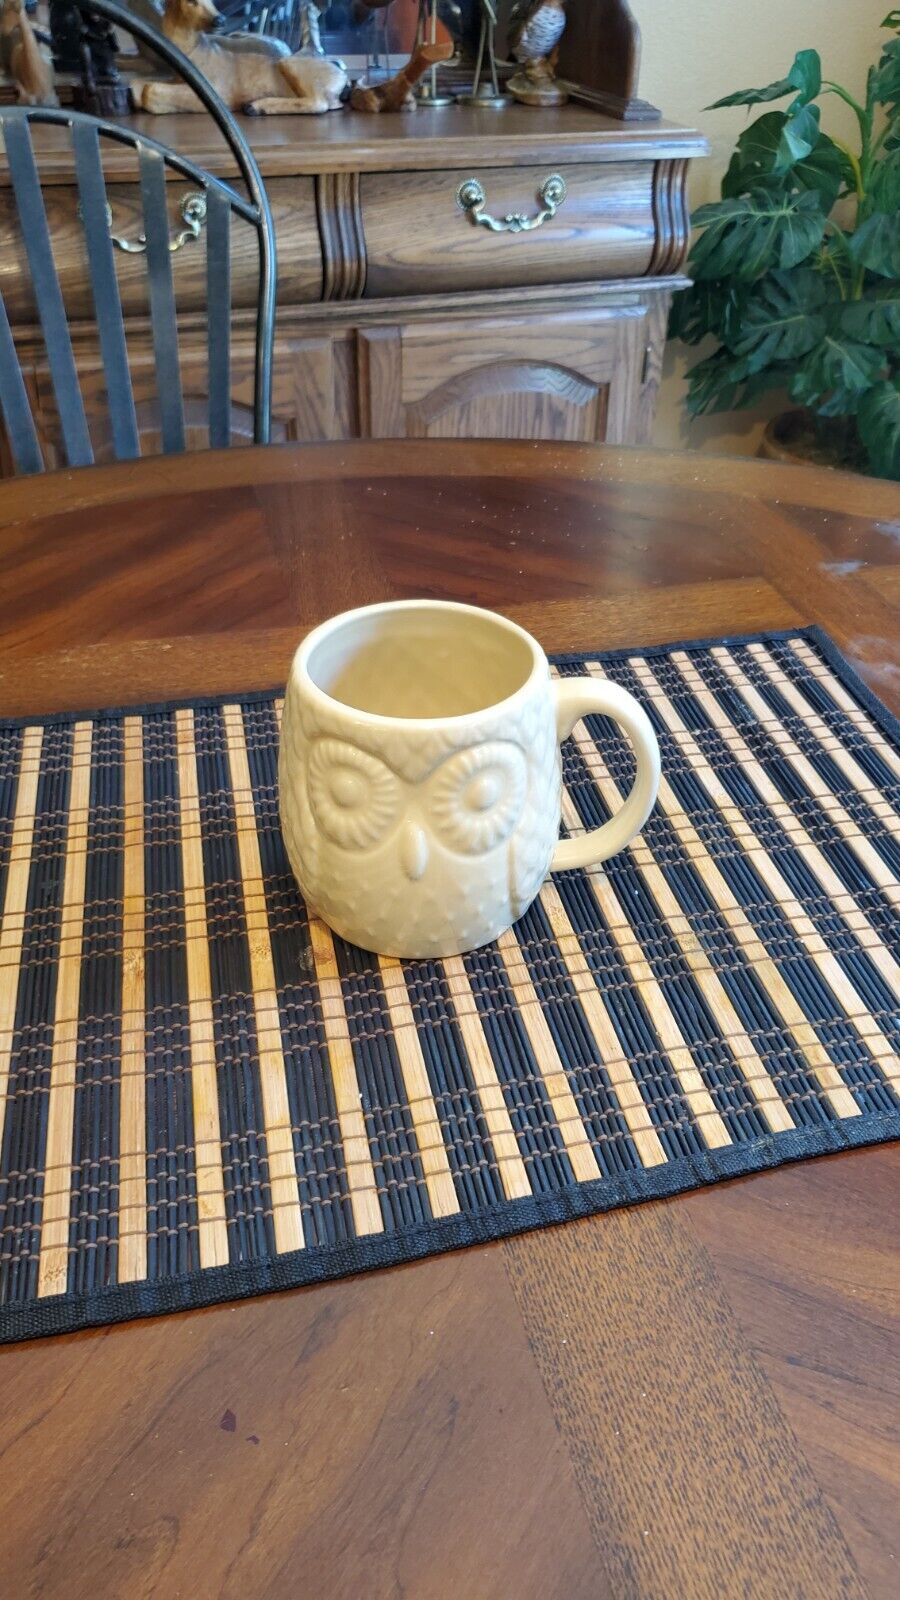 Beige Ceramic OWL Coffee Cup by West Helm - A set of 2 Mugs